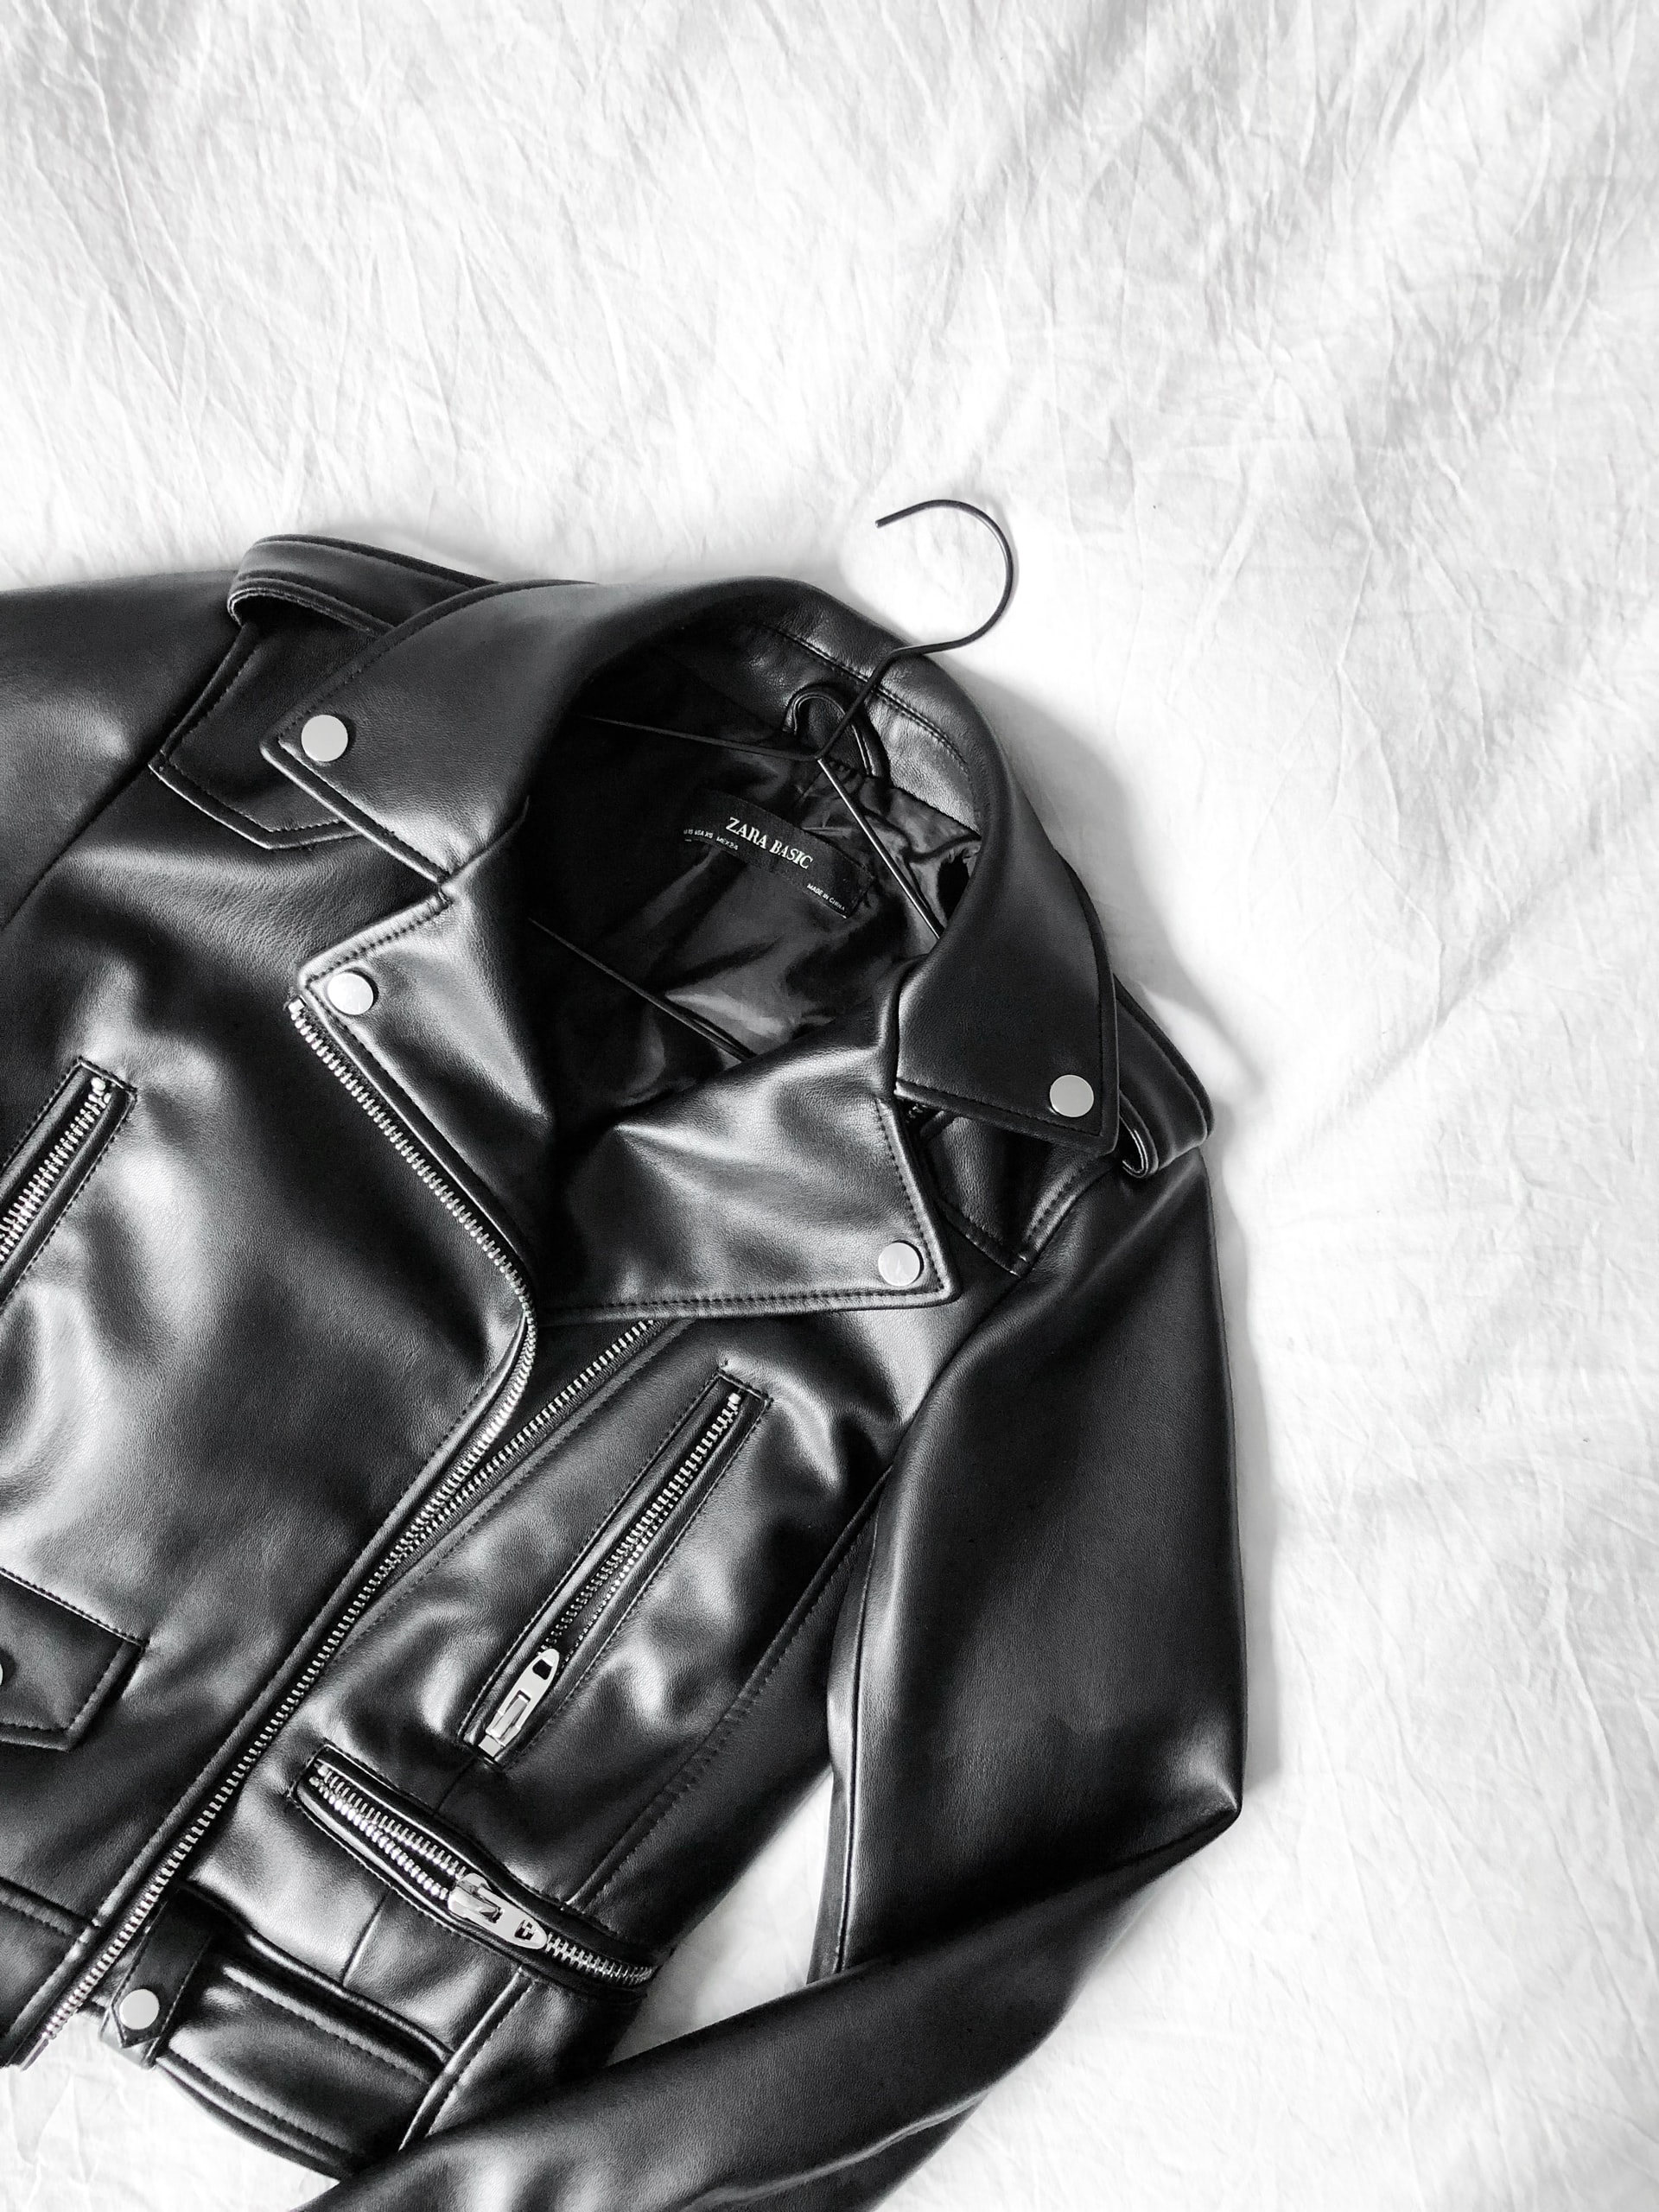 How to wear a leather jacket?